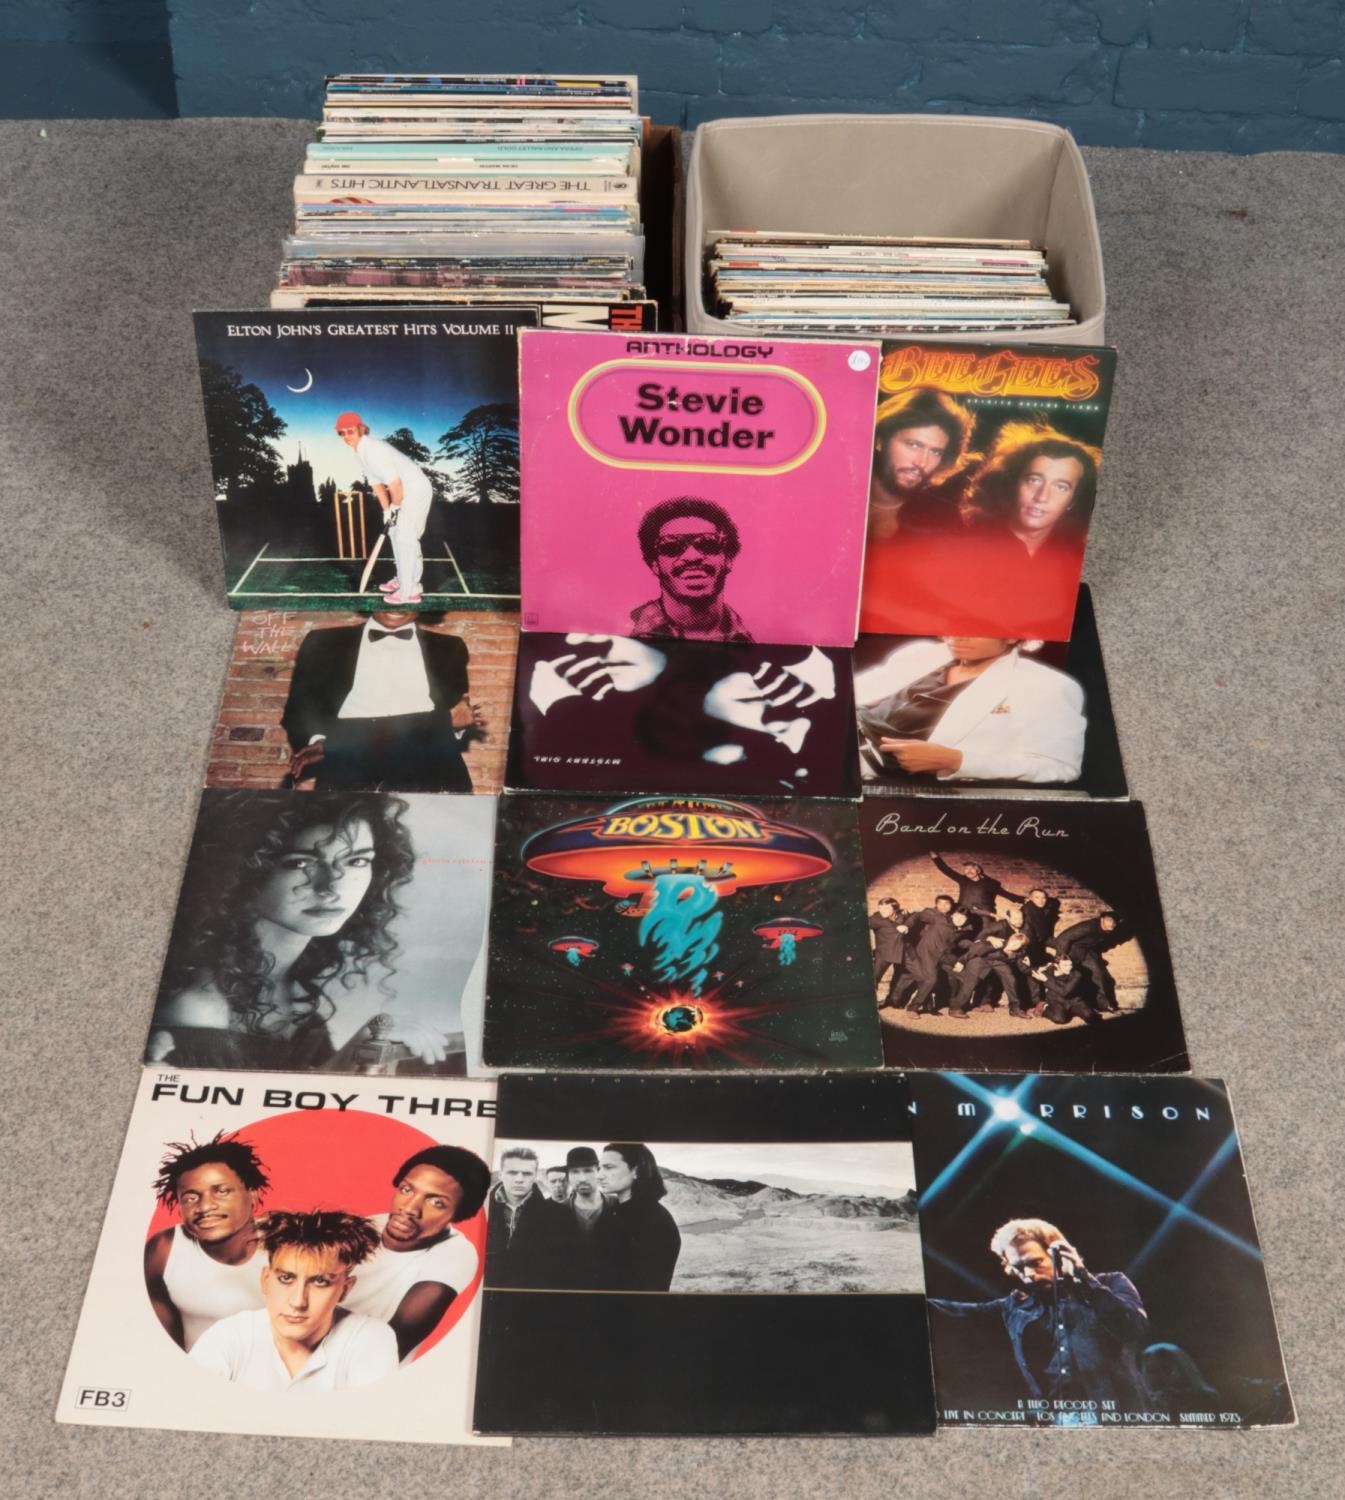 Two large boxes of vinyl records, to include The Joshua Tree by U2, Michael Jackson, Elton John,